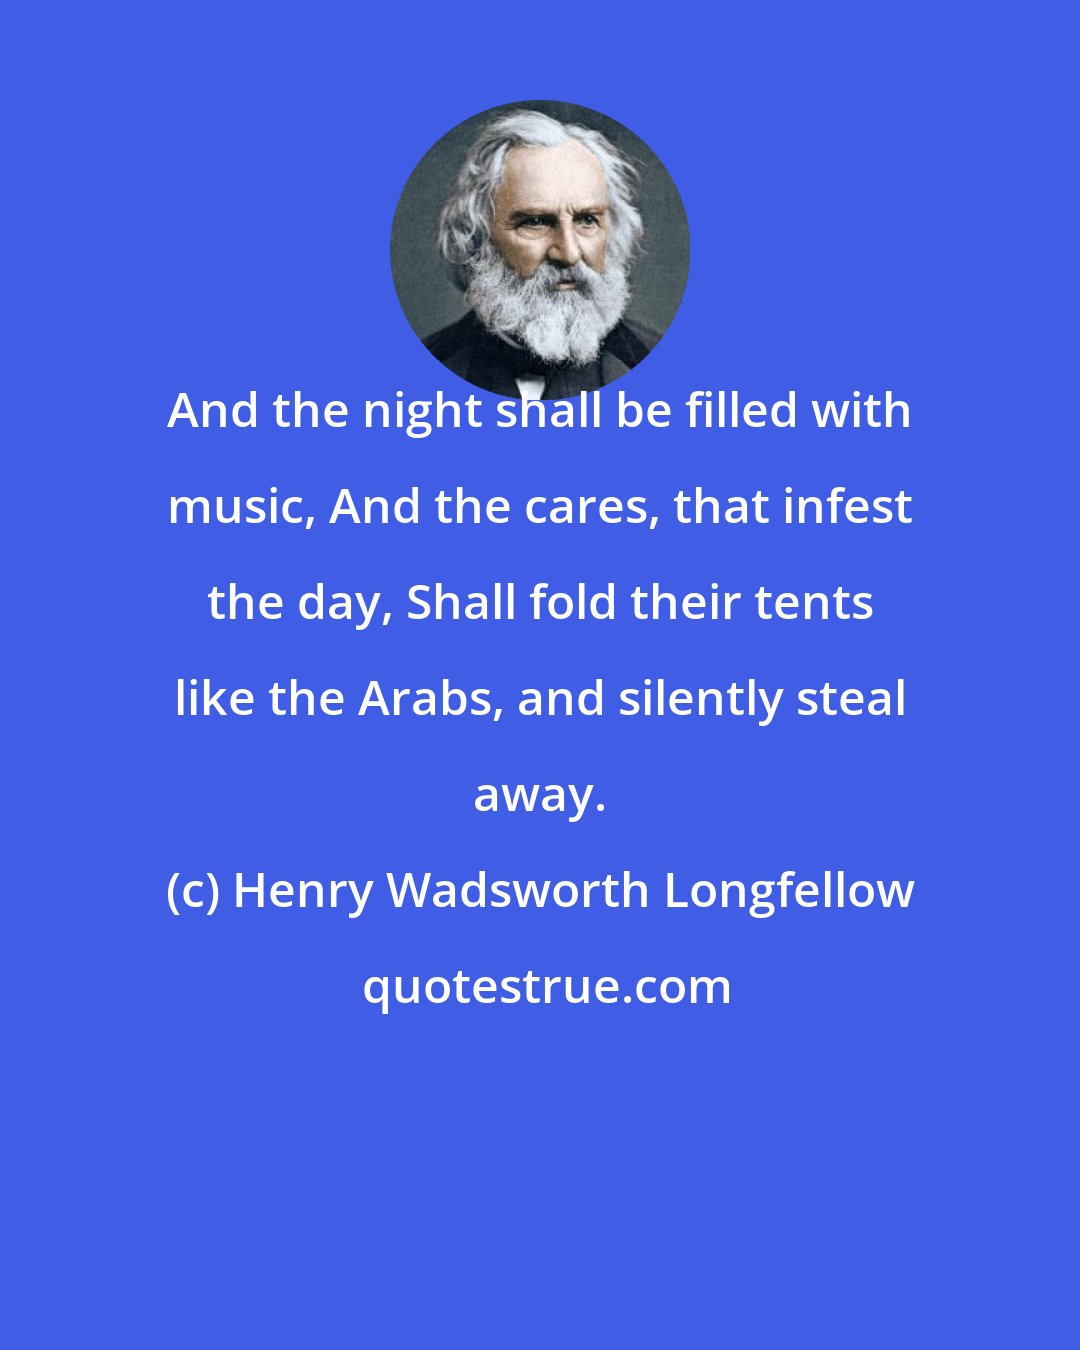 Henry Wadsworth Longfellow: And the night shall be filled with music, And the cares, that infest the day, Shall fold their tents like the Arabs, and silently steal away.